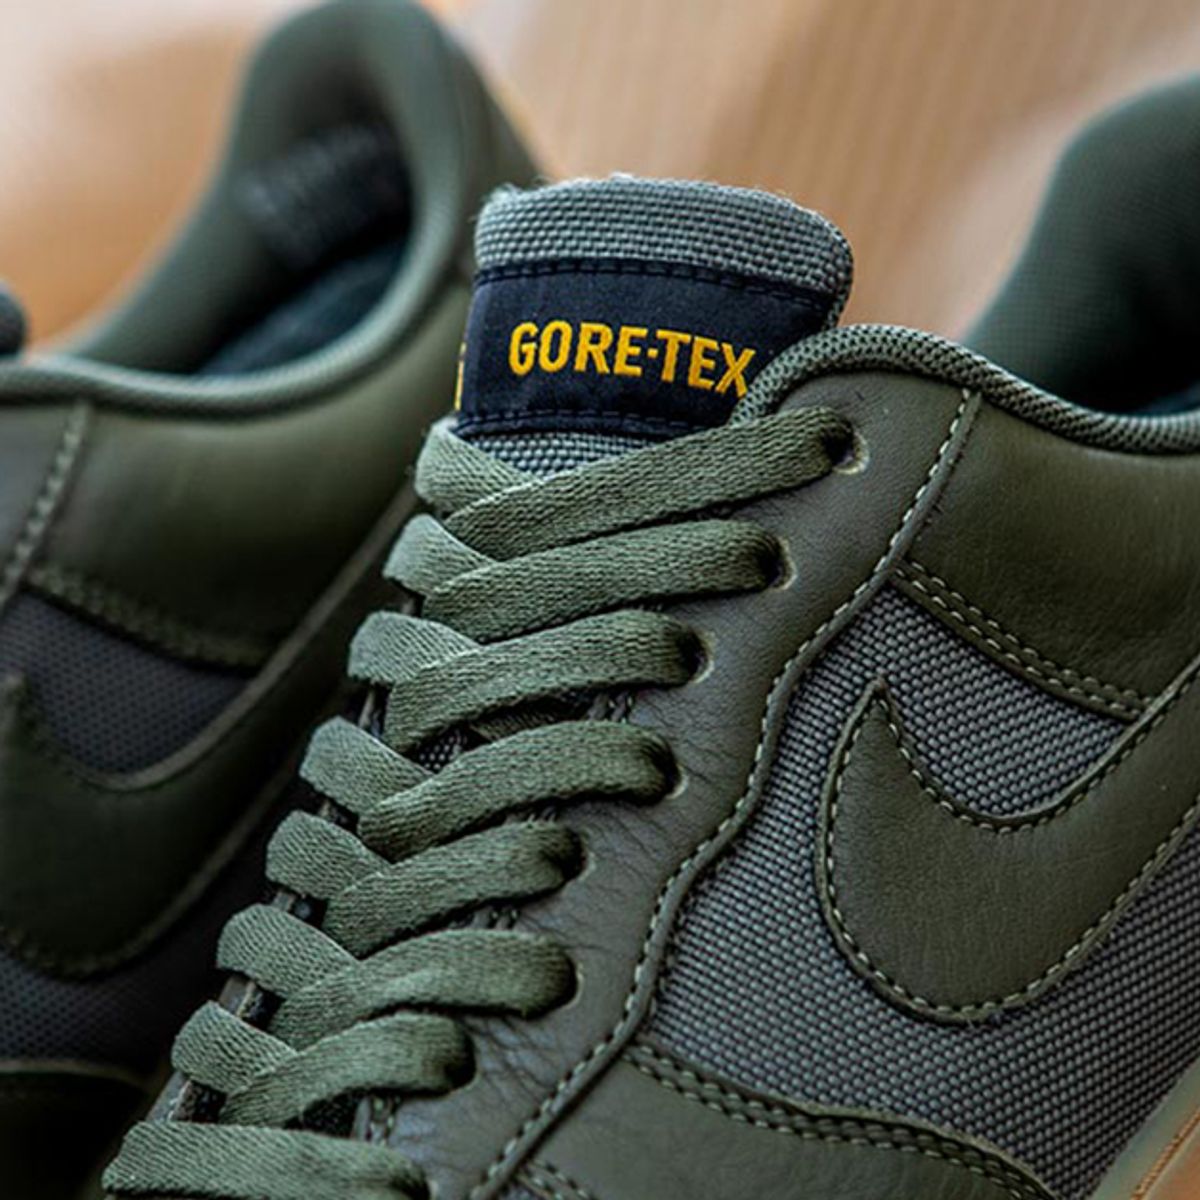 Exclusive Look: Nike's GORE-TEX Air Force 1 Collection - Sneaker Freaker